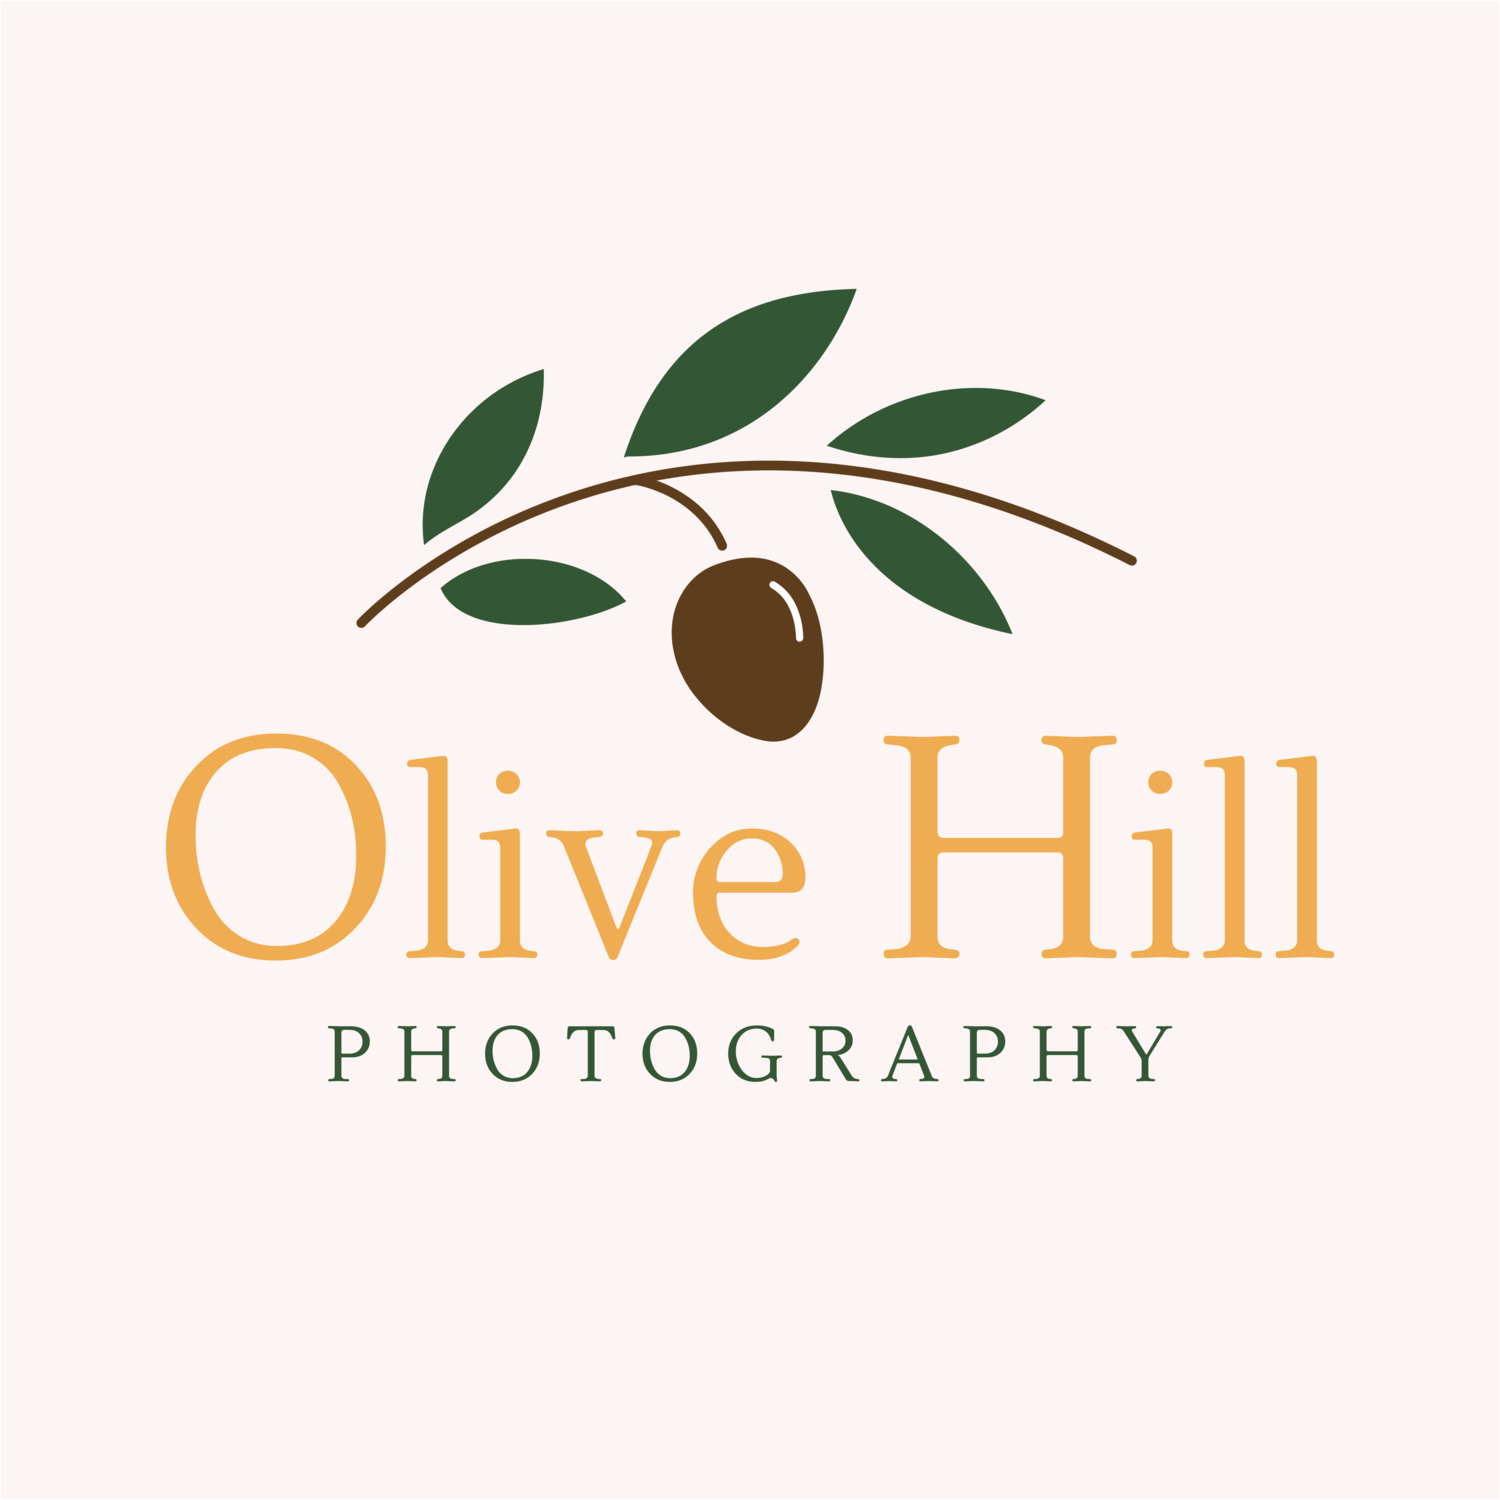 Olive Hill Photography